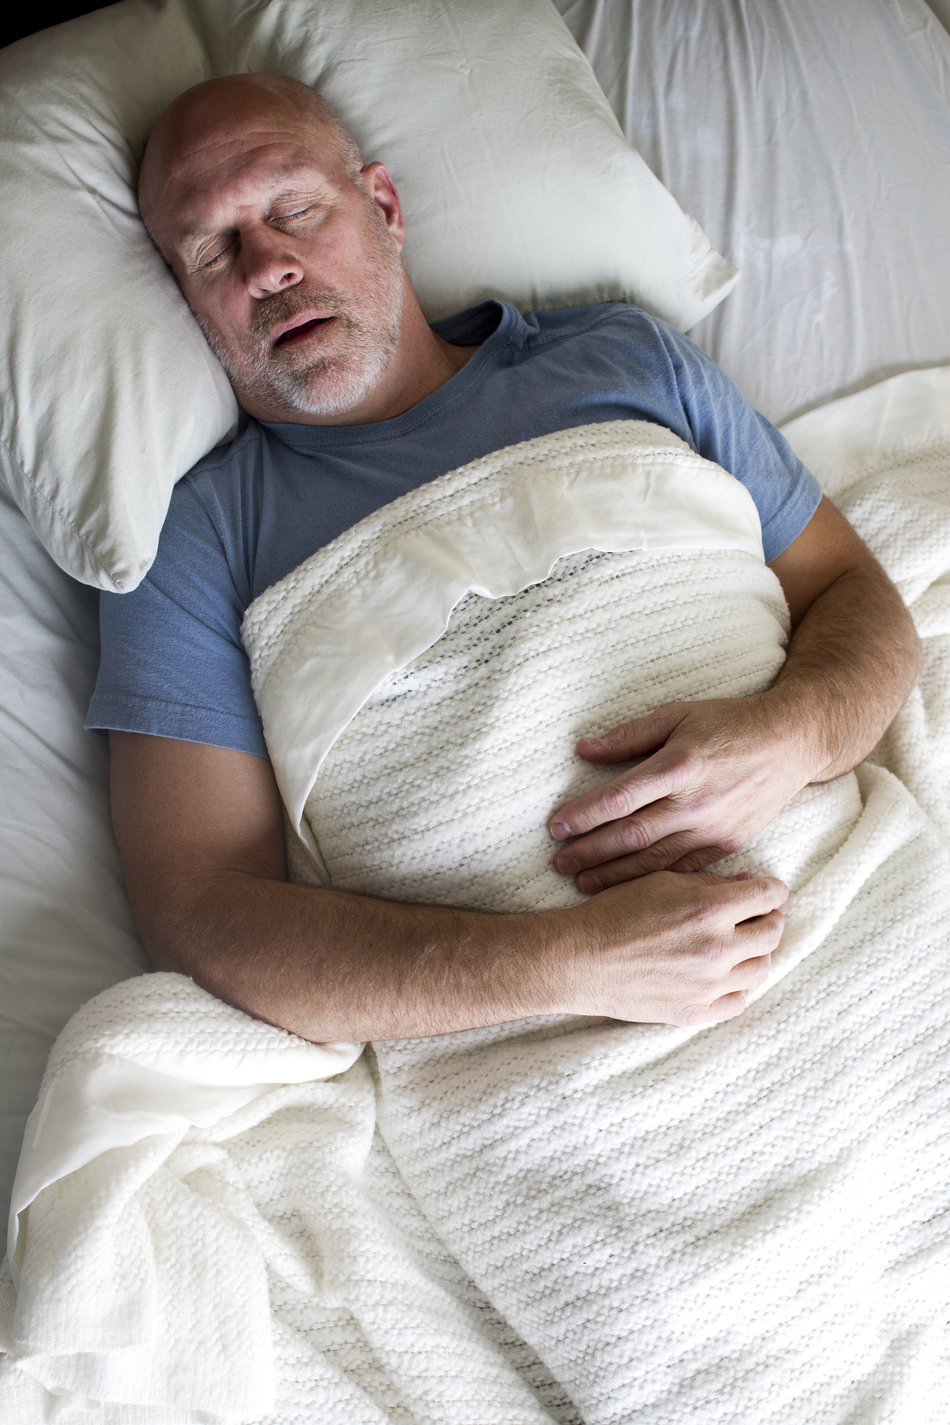 Will a Septoplasty Fix Snoring and Improve Sleep?